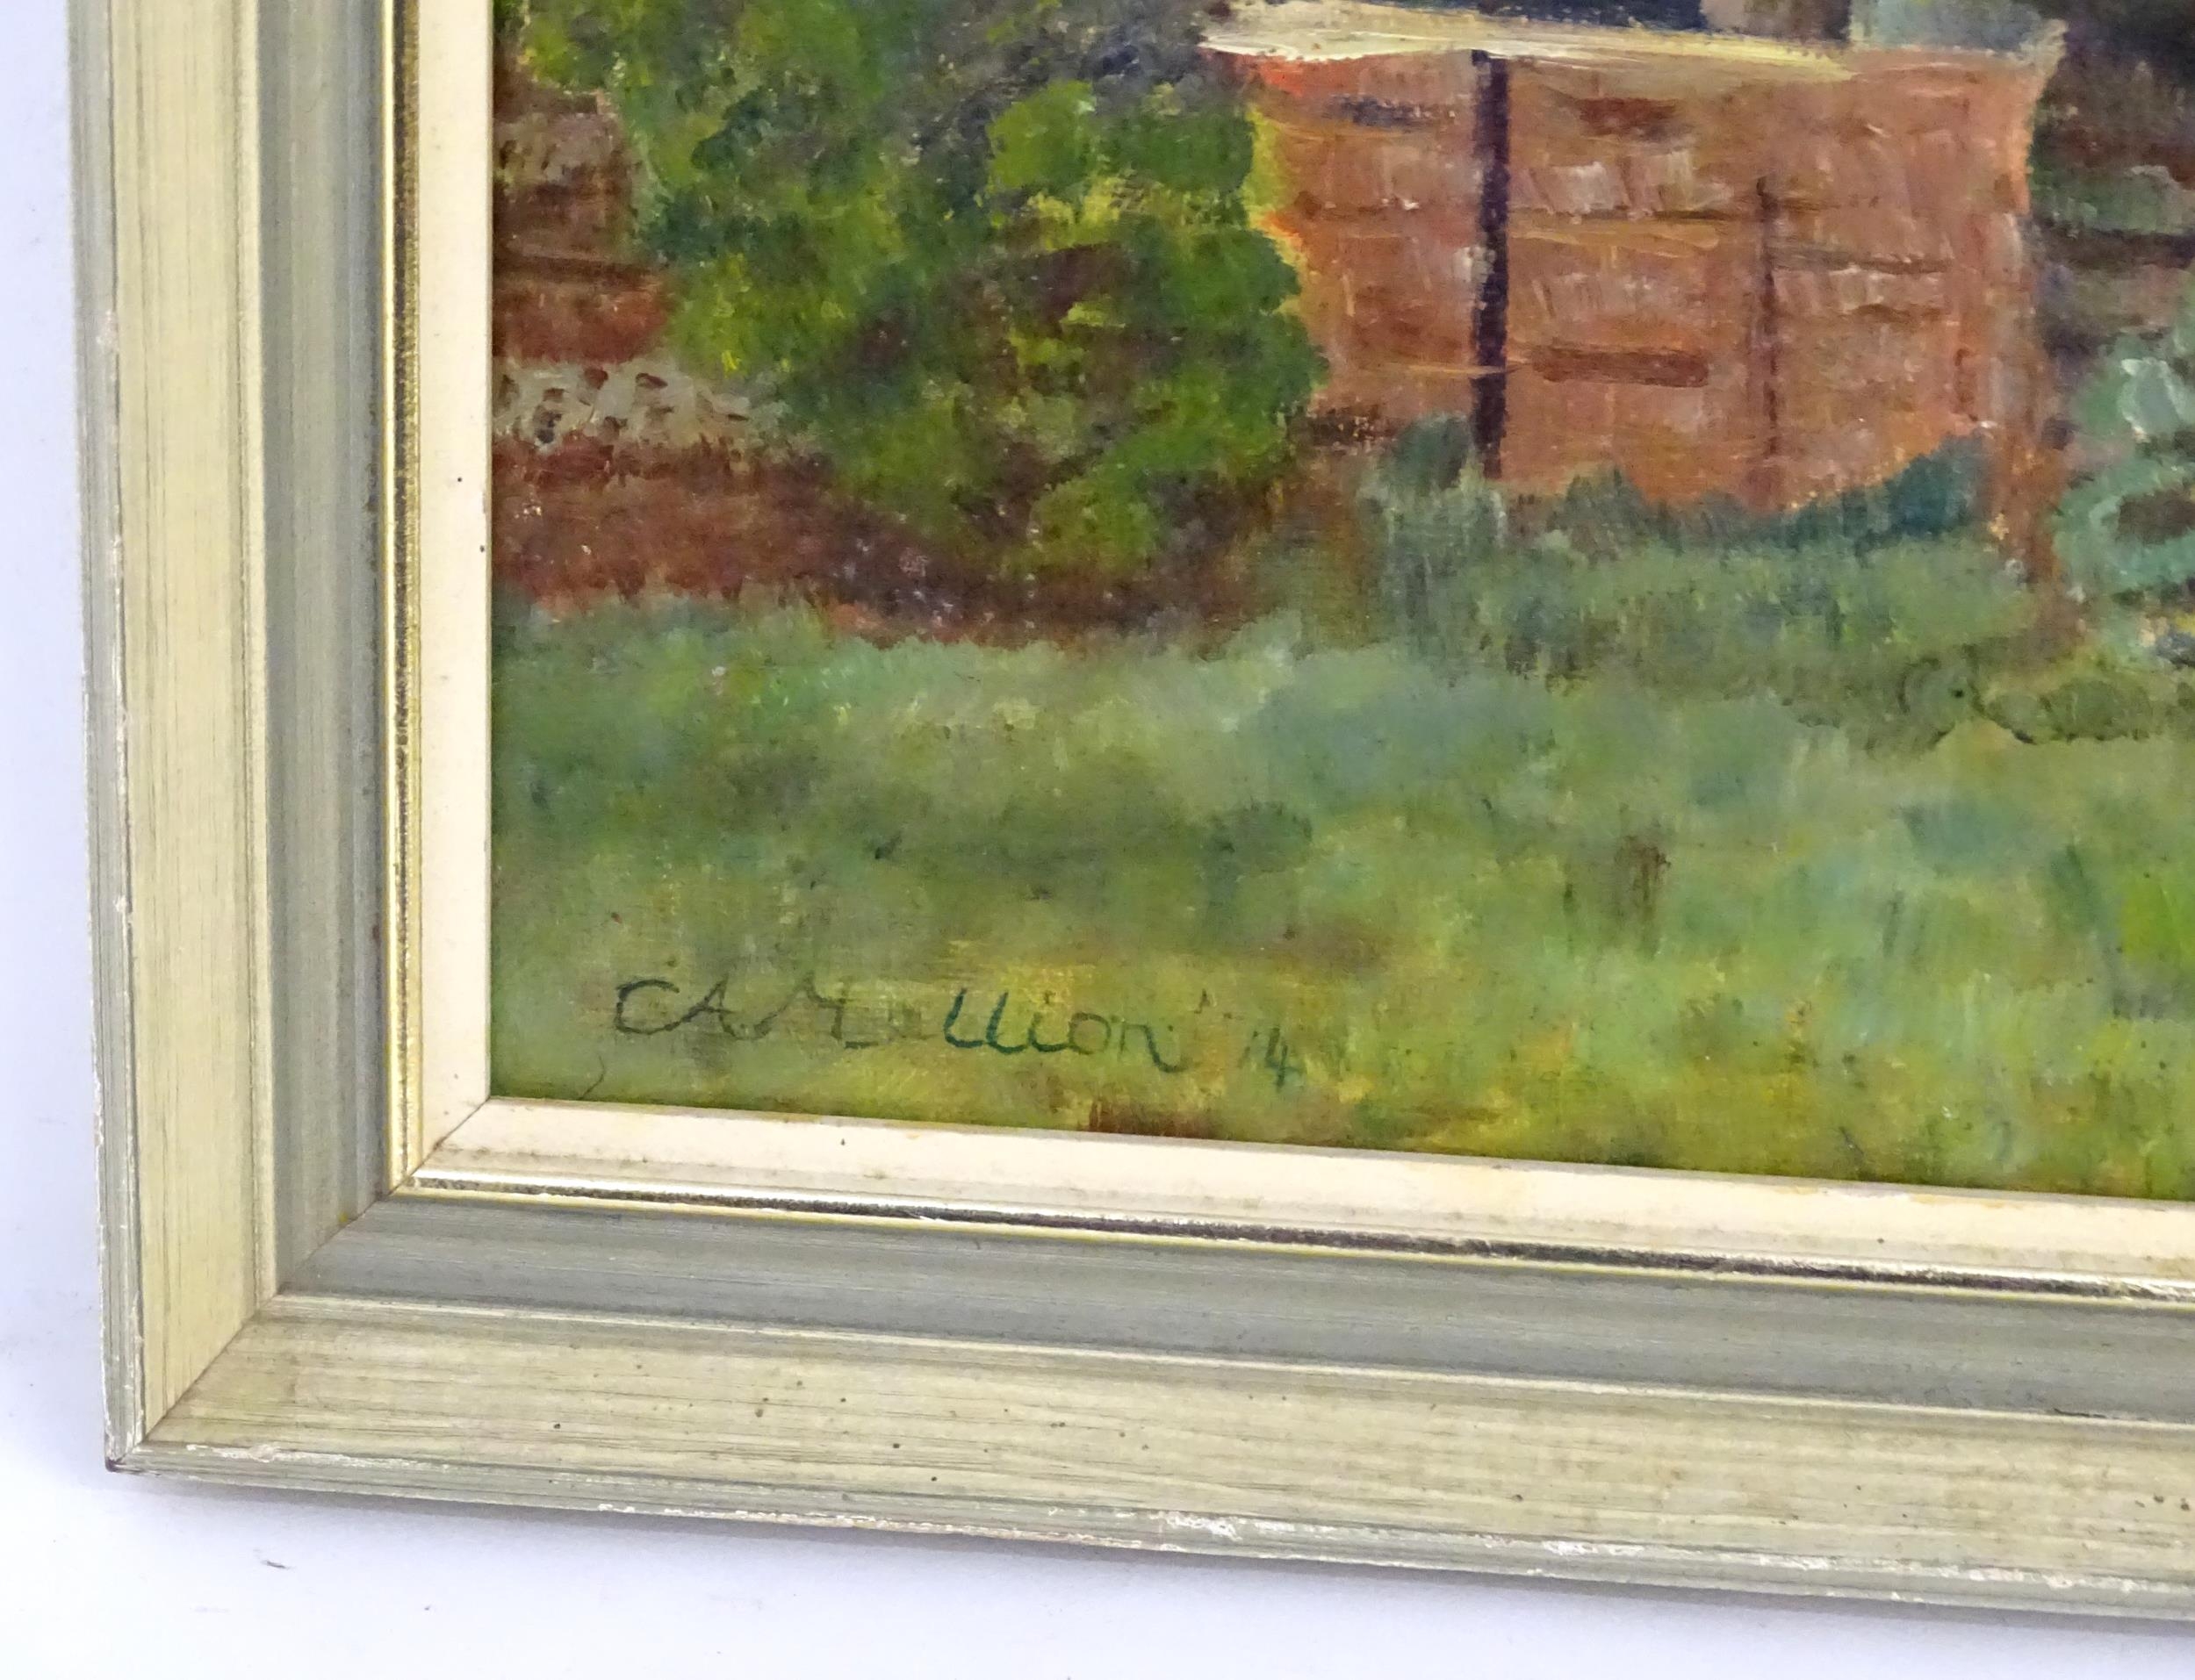 C. A. Mallion, 20th century, Oil on board, A study of a barn with trees. Signed and dated '74 - Image 4 of 4